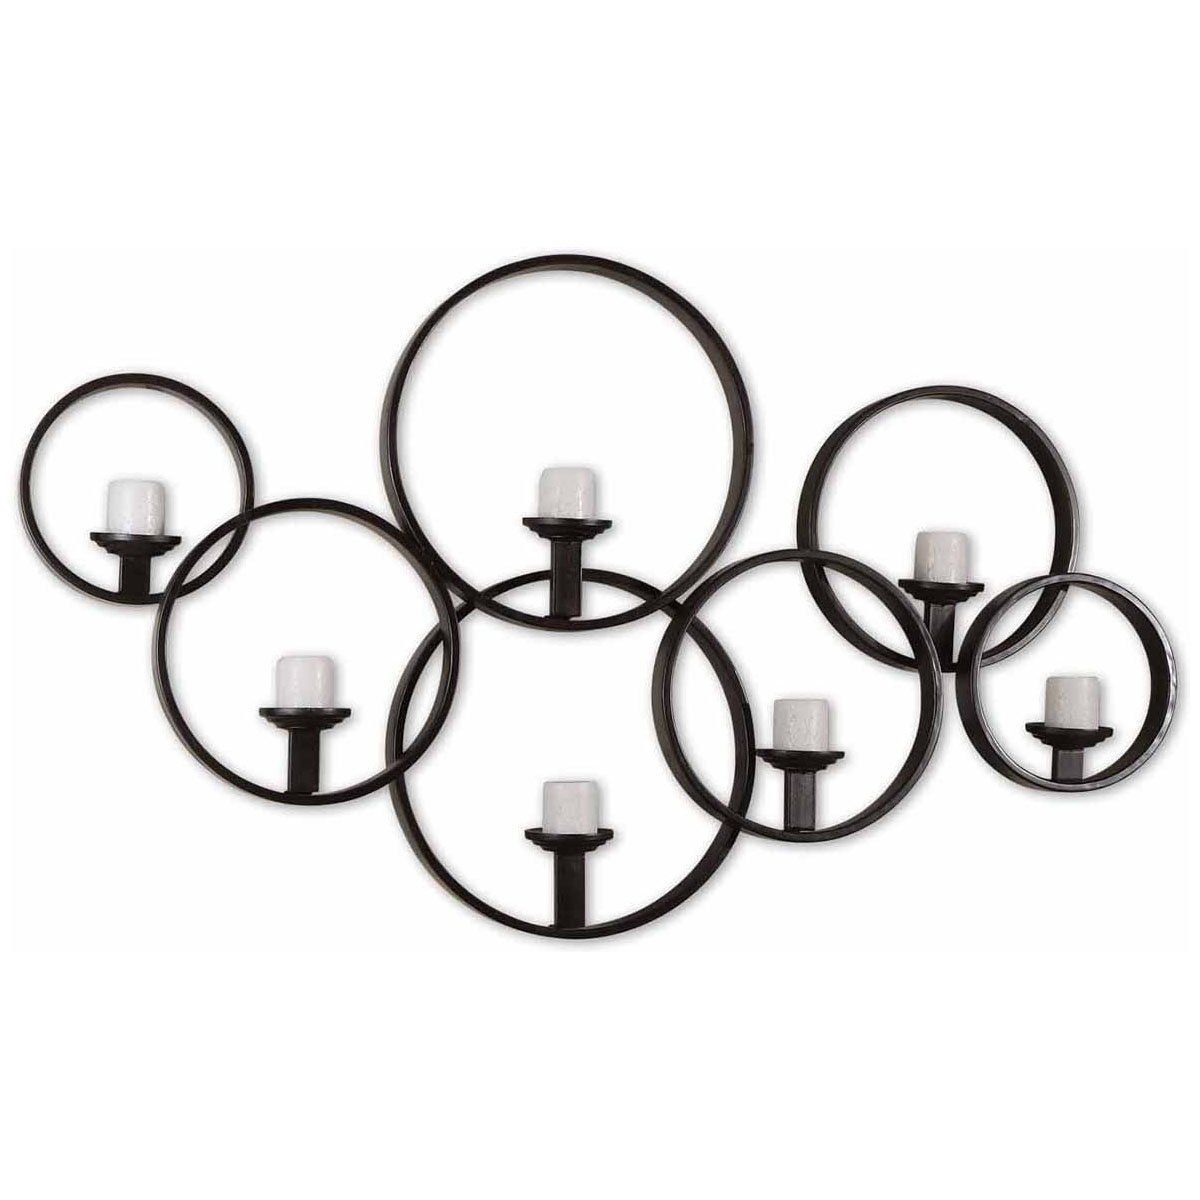 Most Up To Date Metal Wall Art With Candles With Amazon: Uttermost 07617 Kadoka Decorative Wall Candle Holder (View 8 of 15)